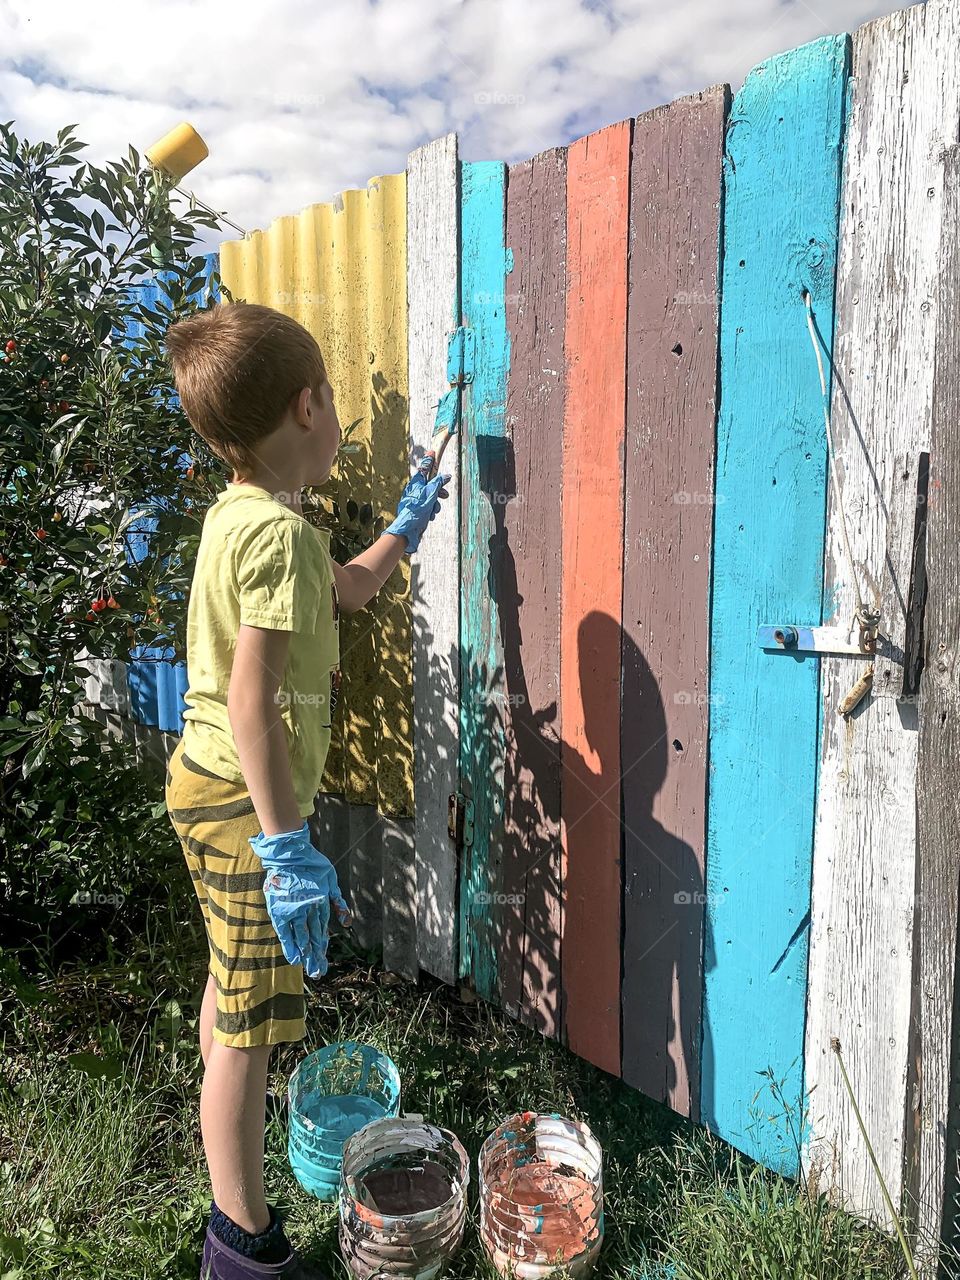 A child boy paints a fence with bright paint in the summer in the village, a funny shadow